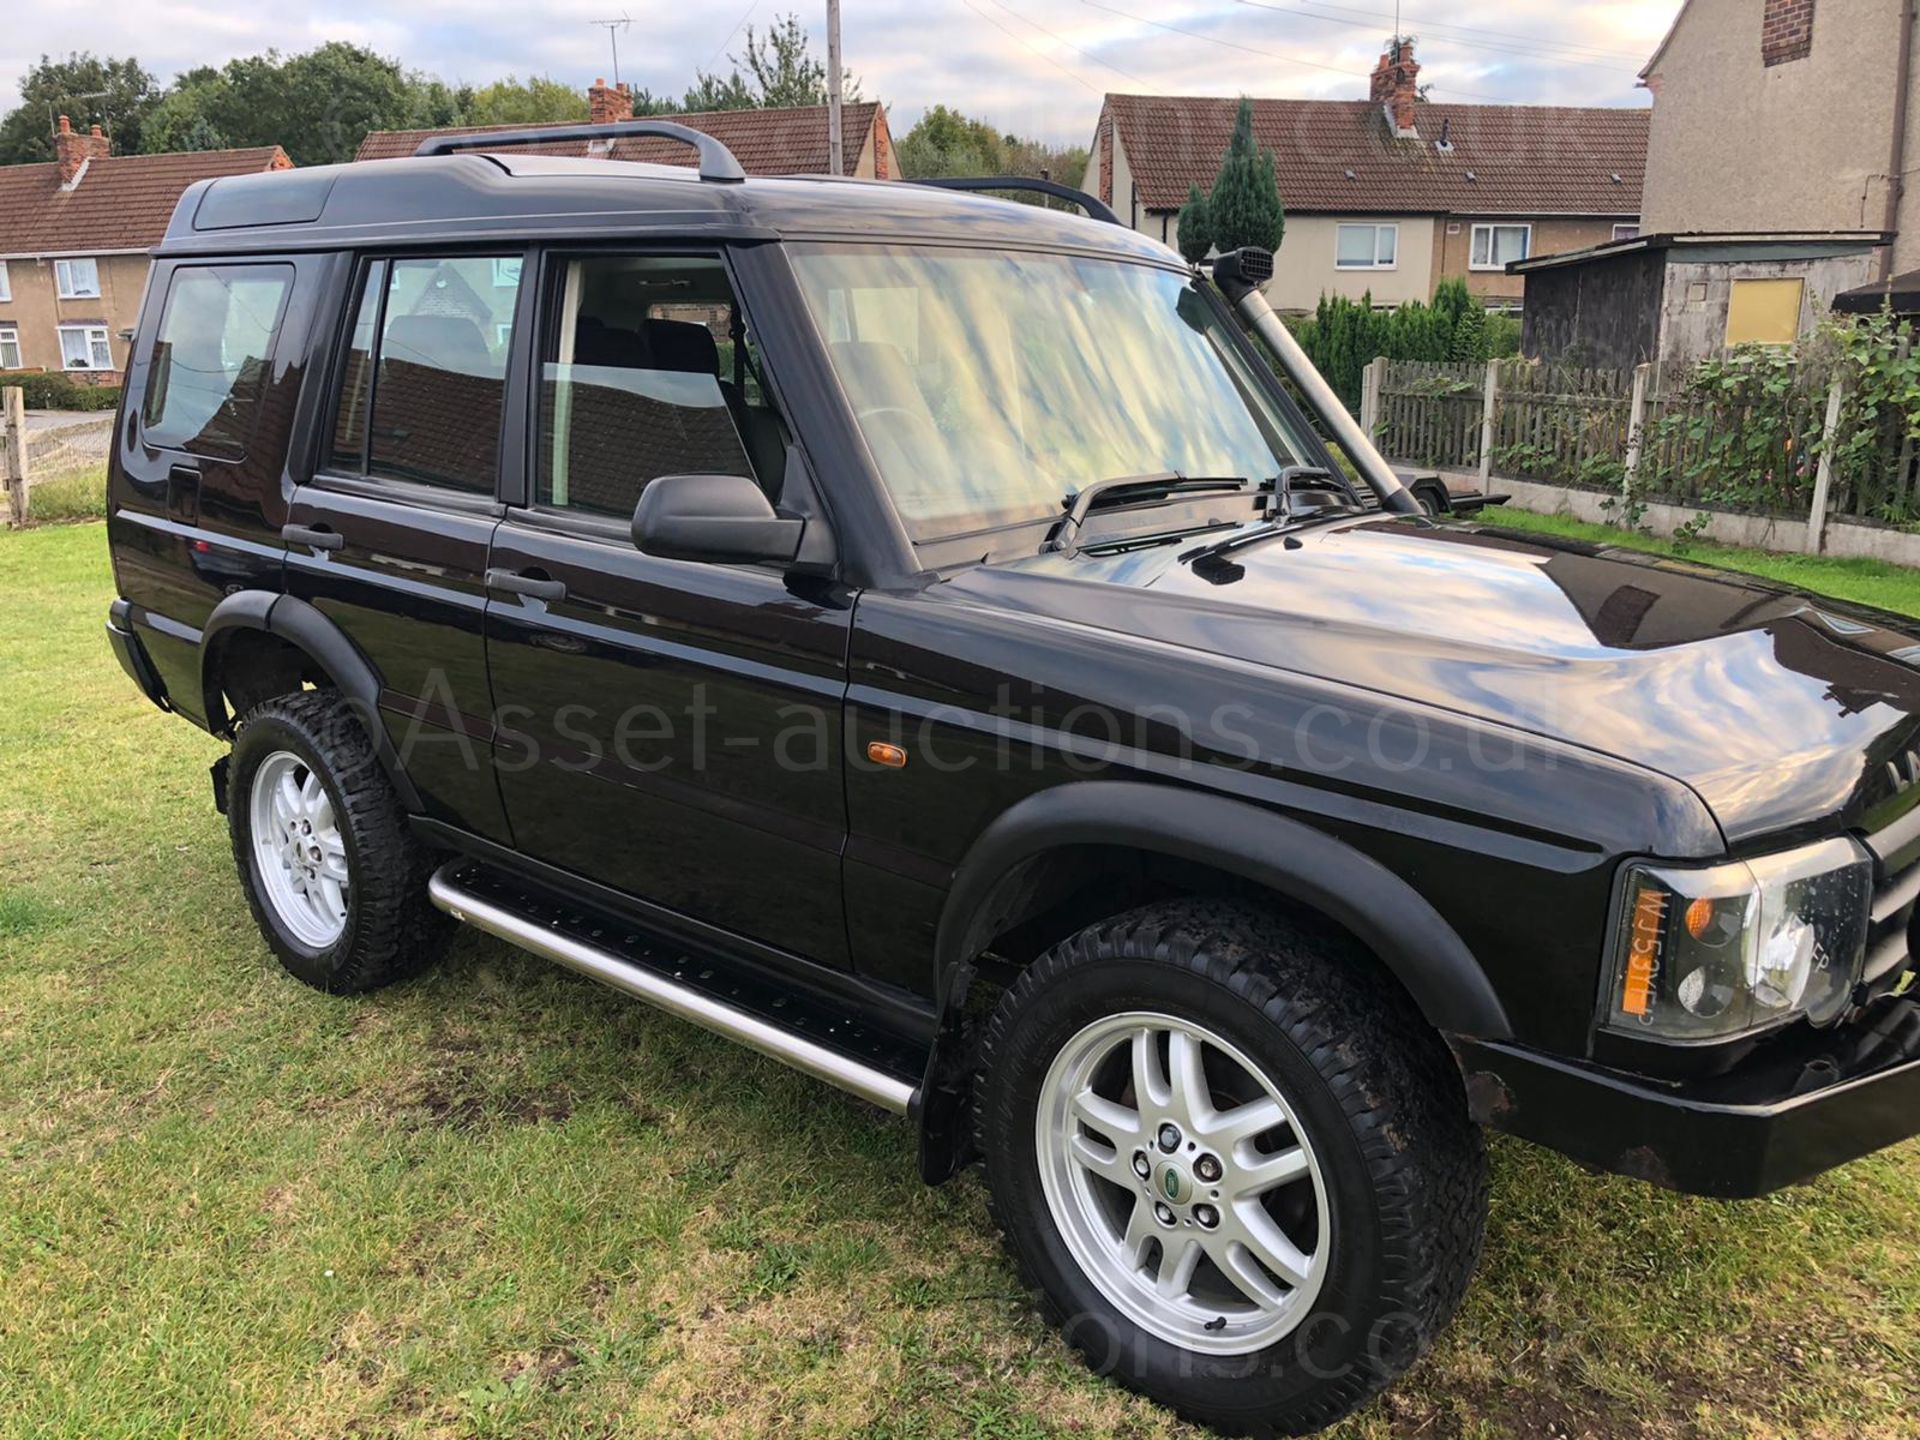 2003 LAND ROVER DISCOVERY TD5 GS AUTO 7 SEAT BLACK ESTATE, 132,559 MILES, 2.5 DIESEL ENGINE *NO VAT* - Image 2 of 30